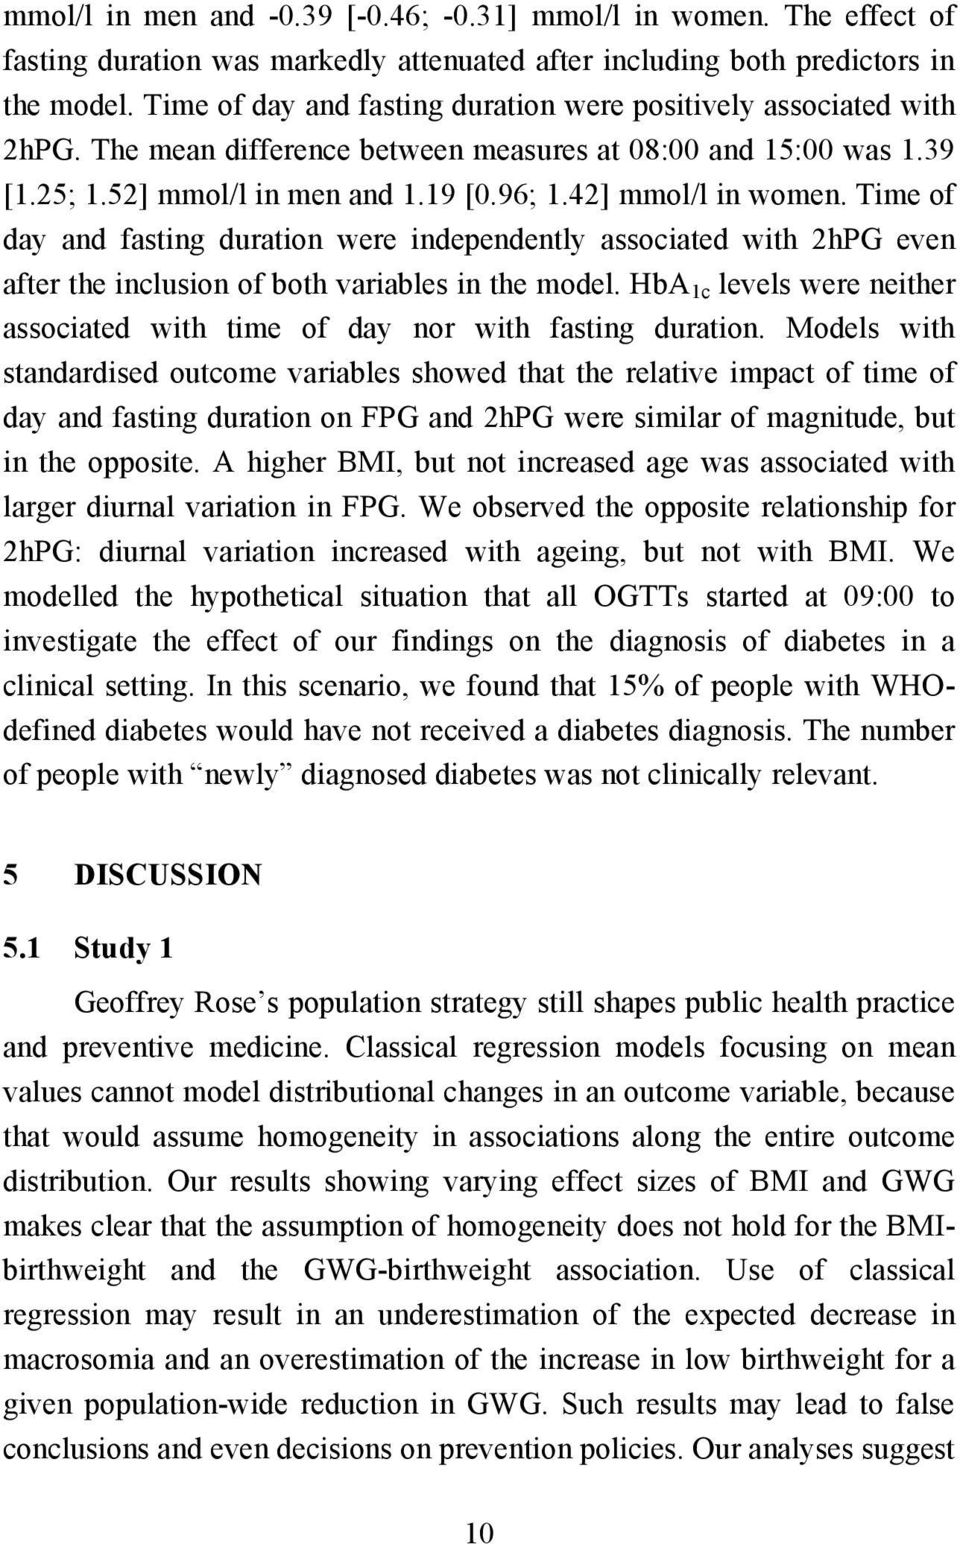 42] mmol/l in women. Time of day and fasting duration were independently associated with 2hPG even after the inclusion of both variables in the model.